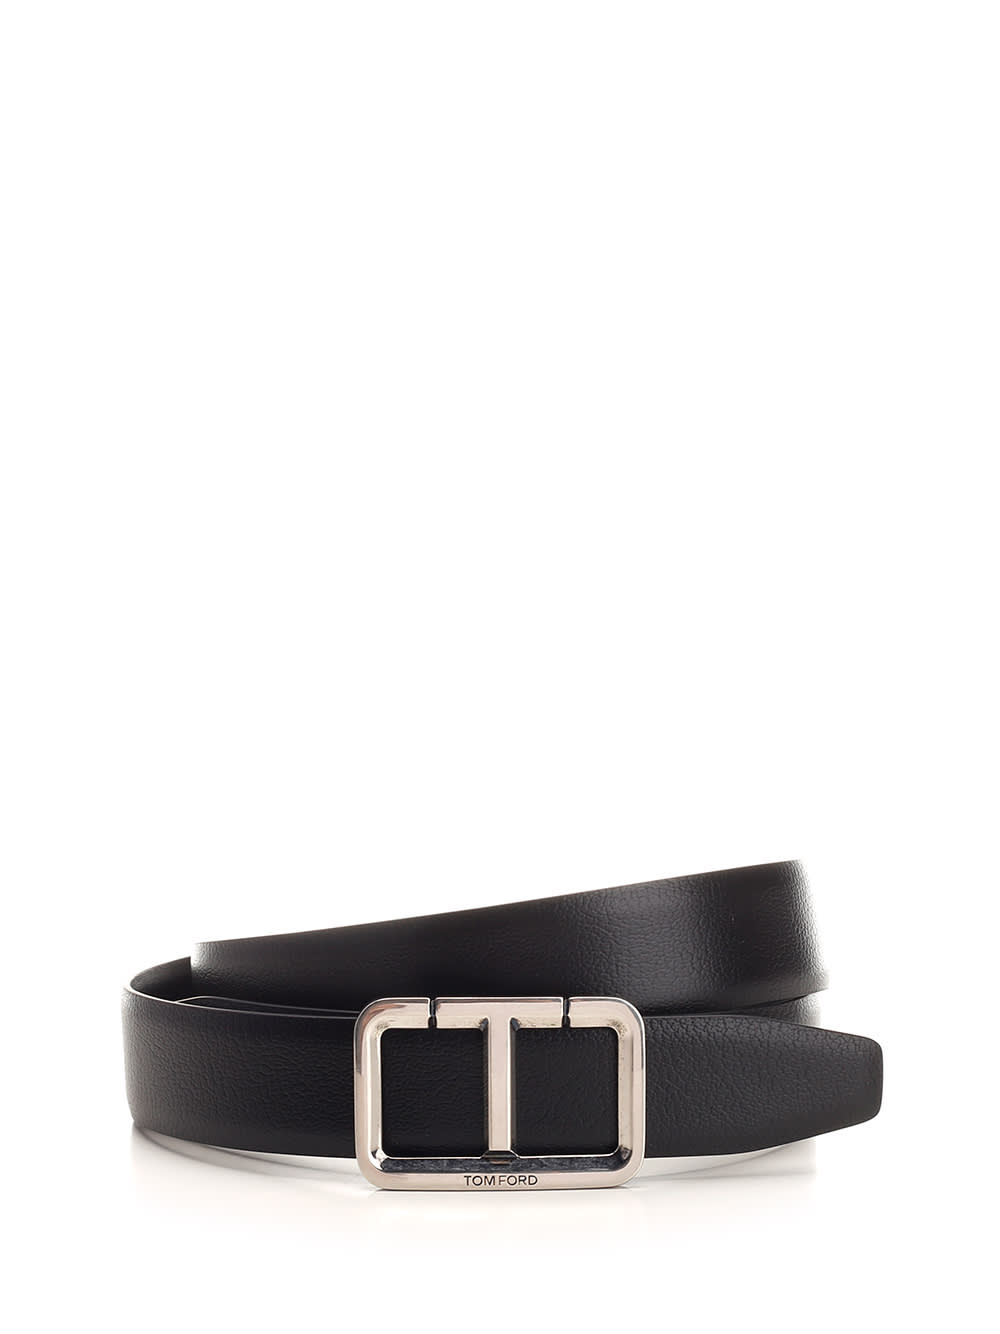 TOM FORD T SHINY LEATHER BELT WITH SILVER BUCKLE